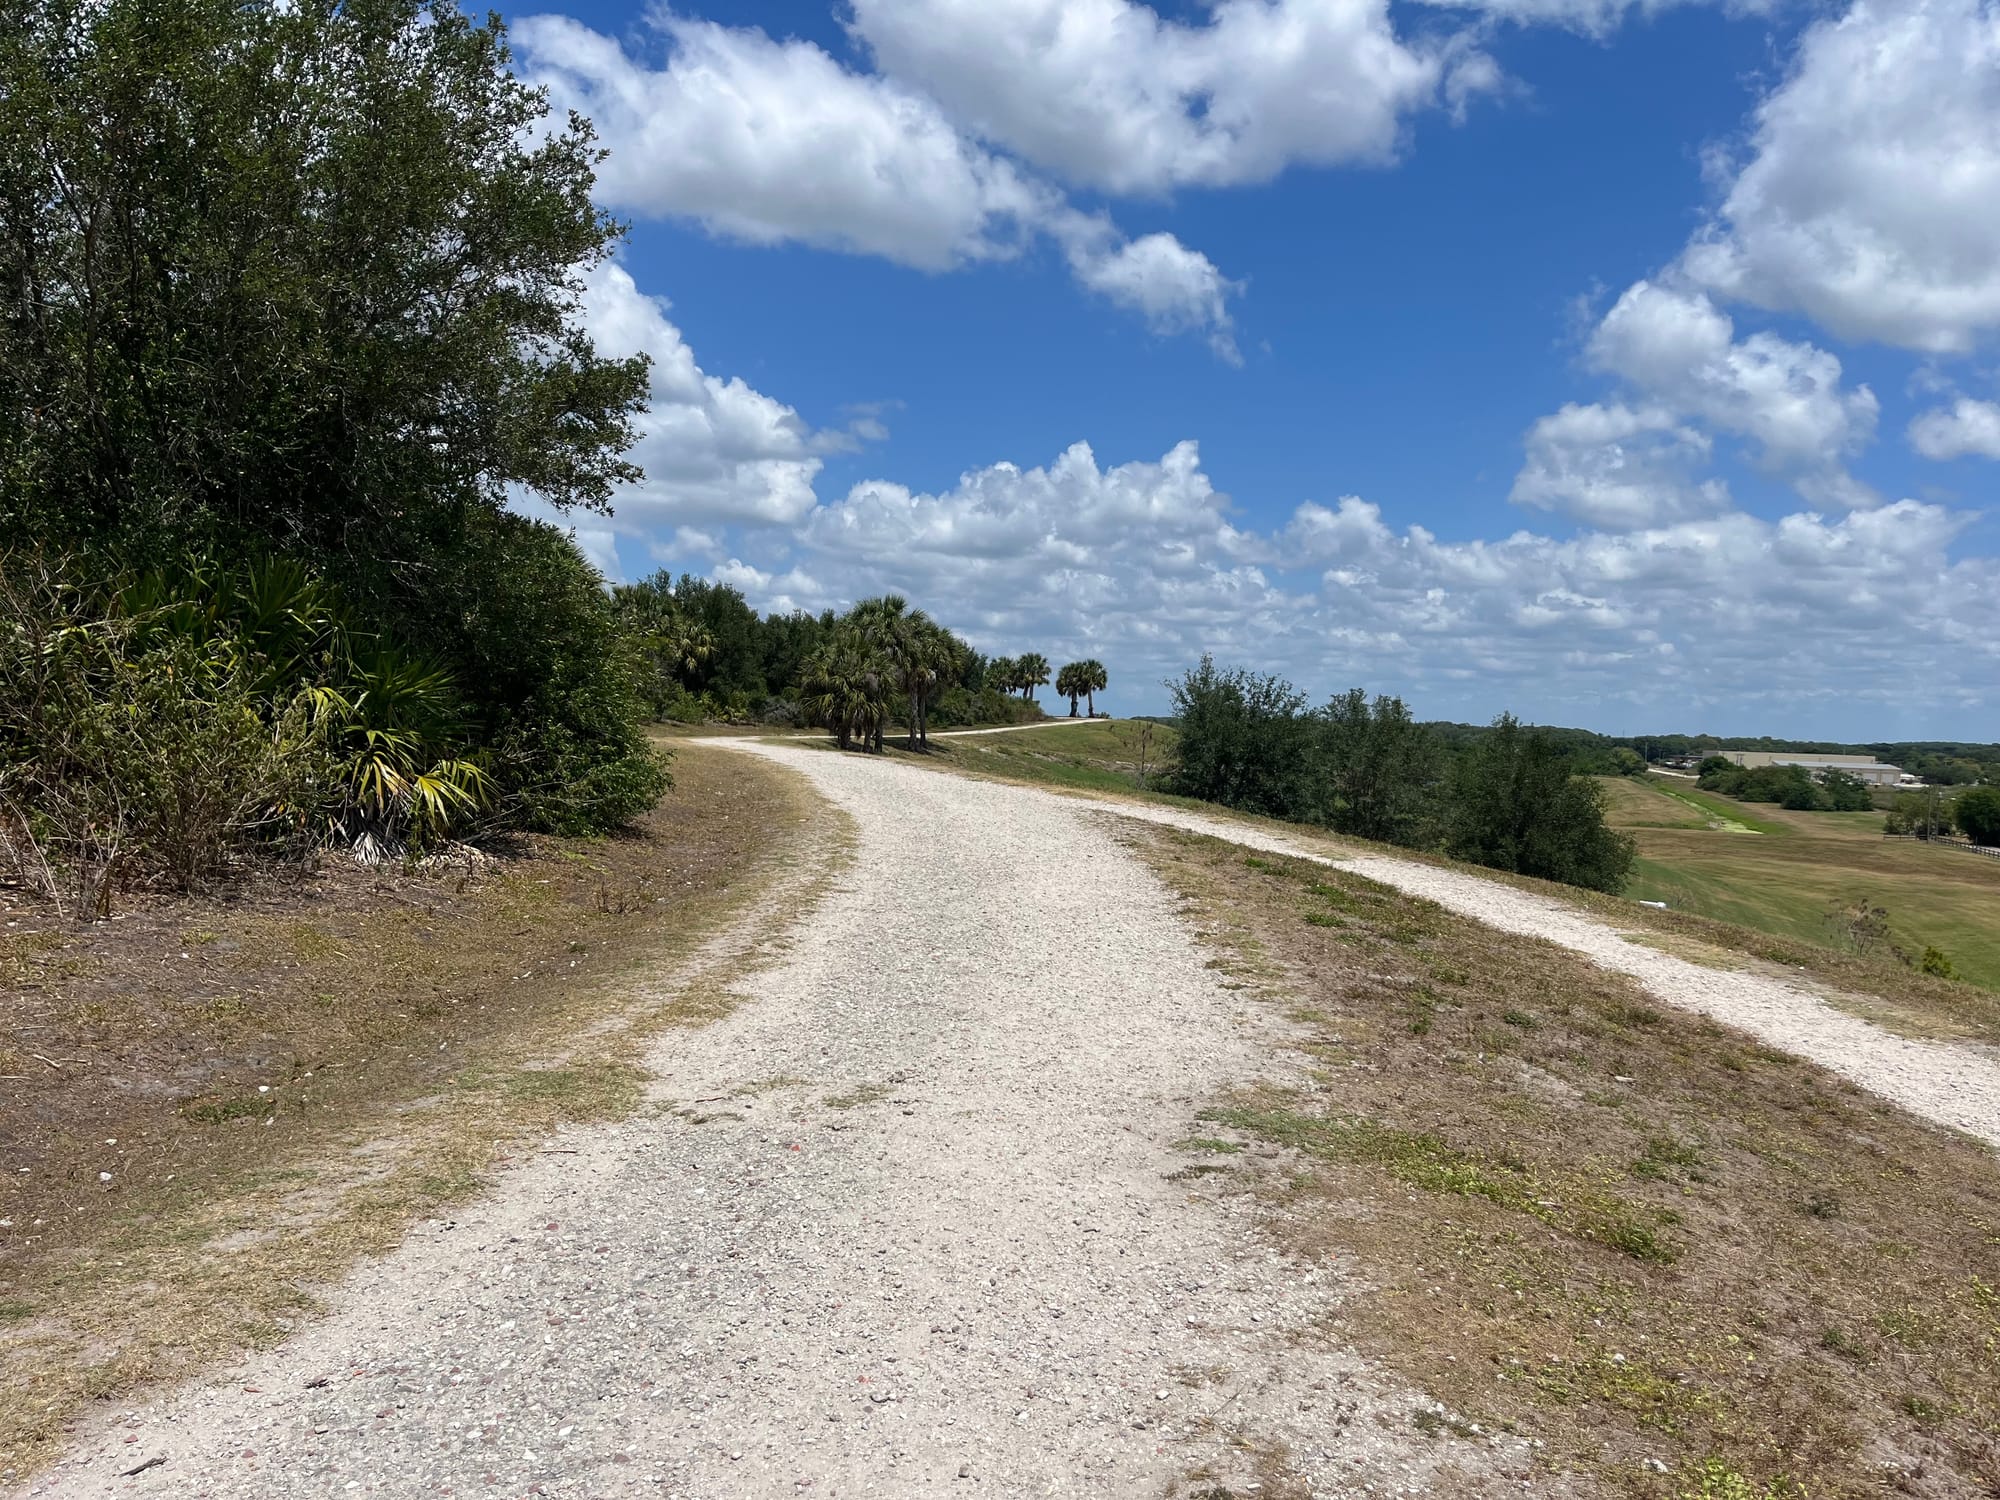 A gravel walking trail at the Sarasota Celery Fields